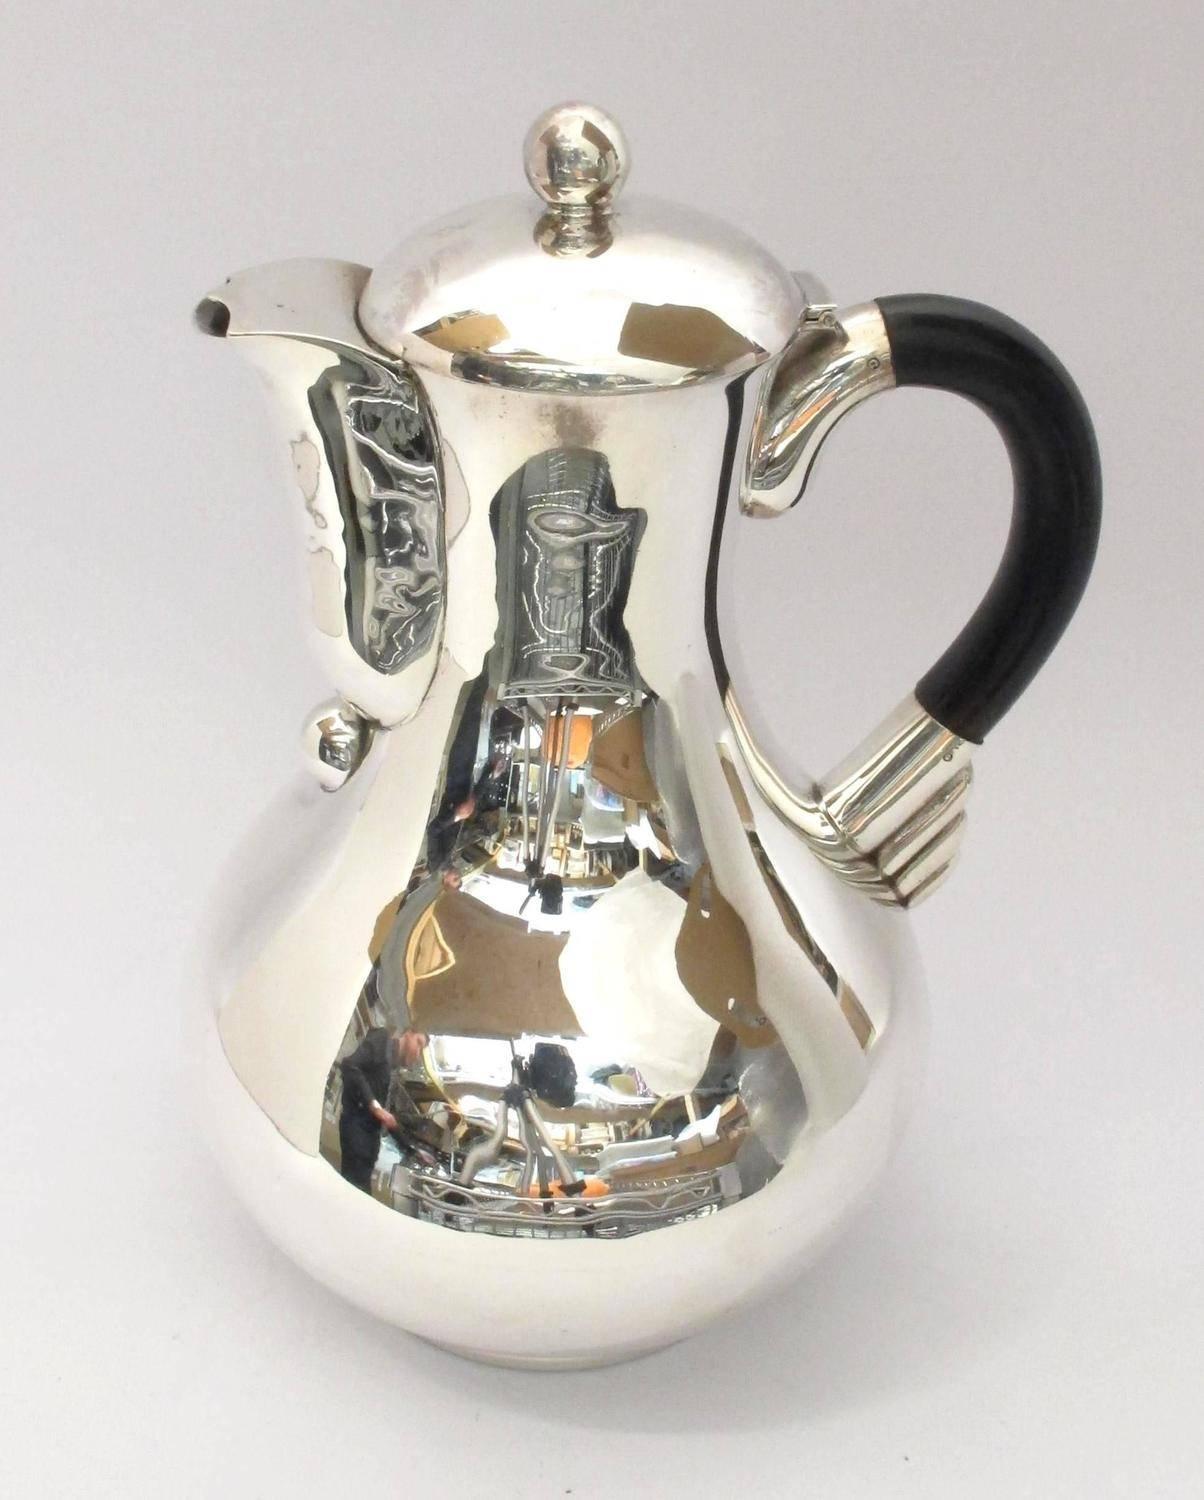 Art Deco 1950s Hector Aguilar Silver Tea and Coffee Set For Sale